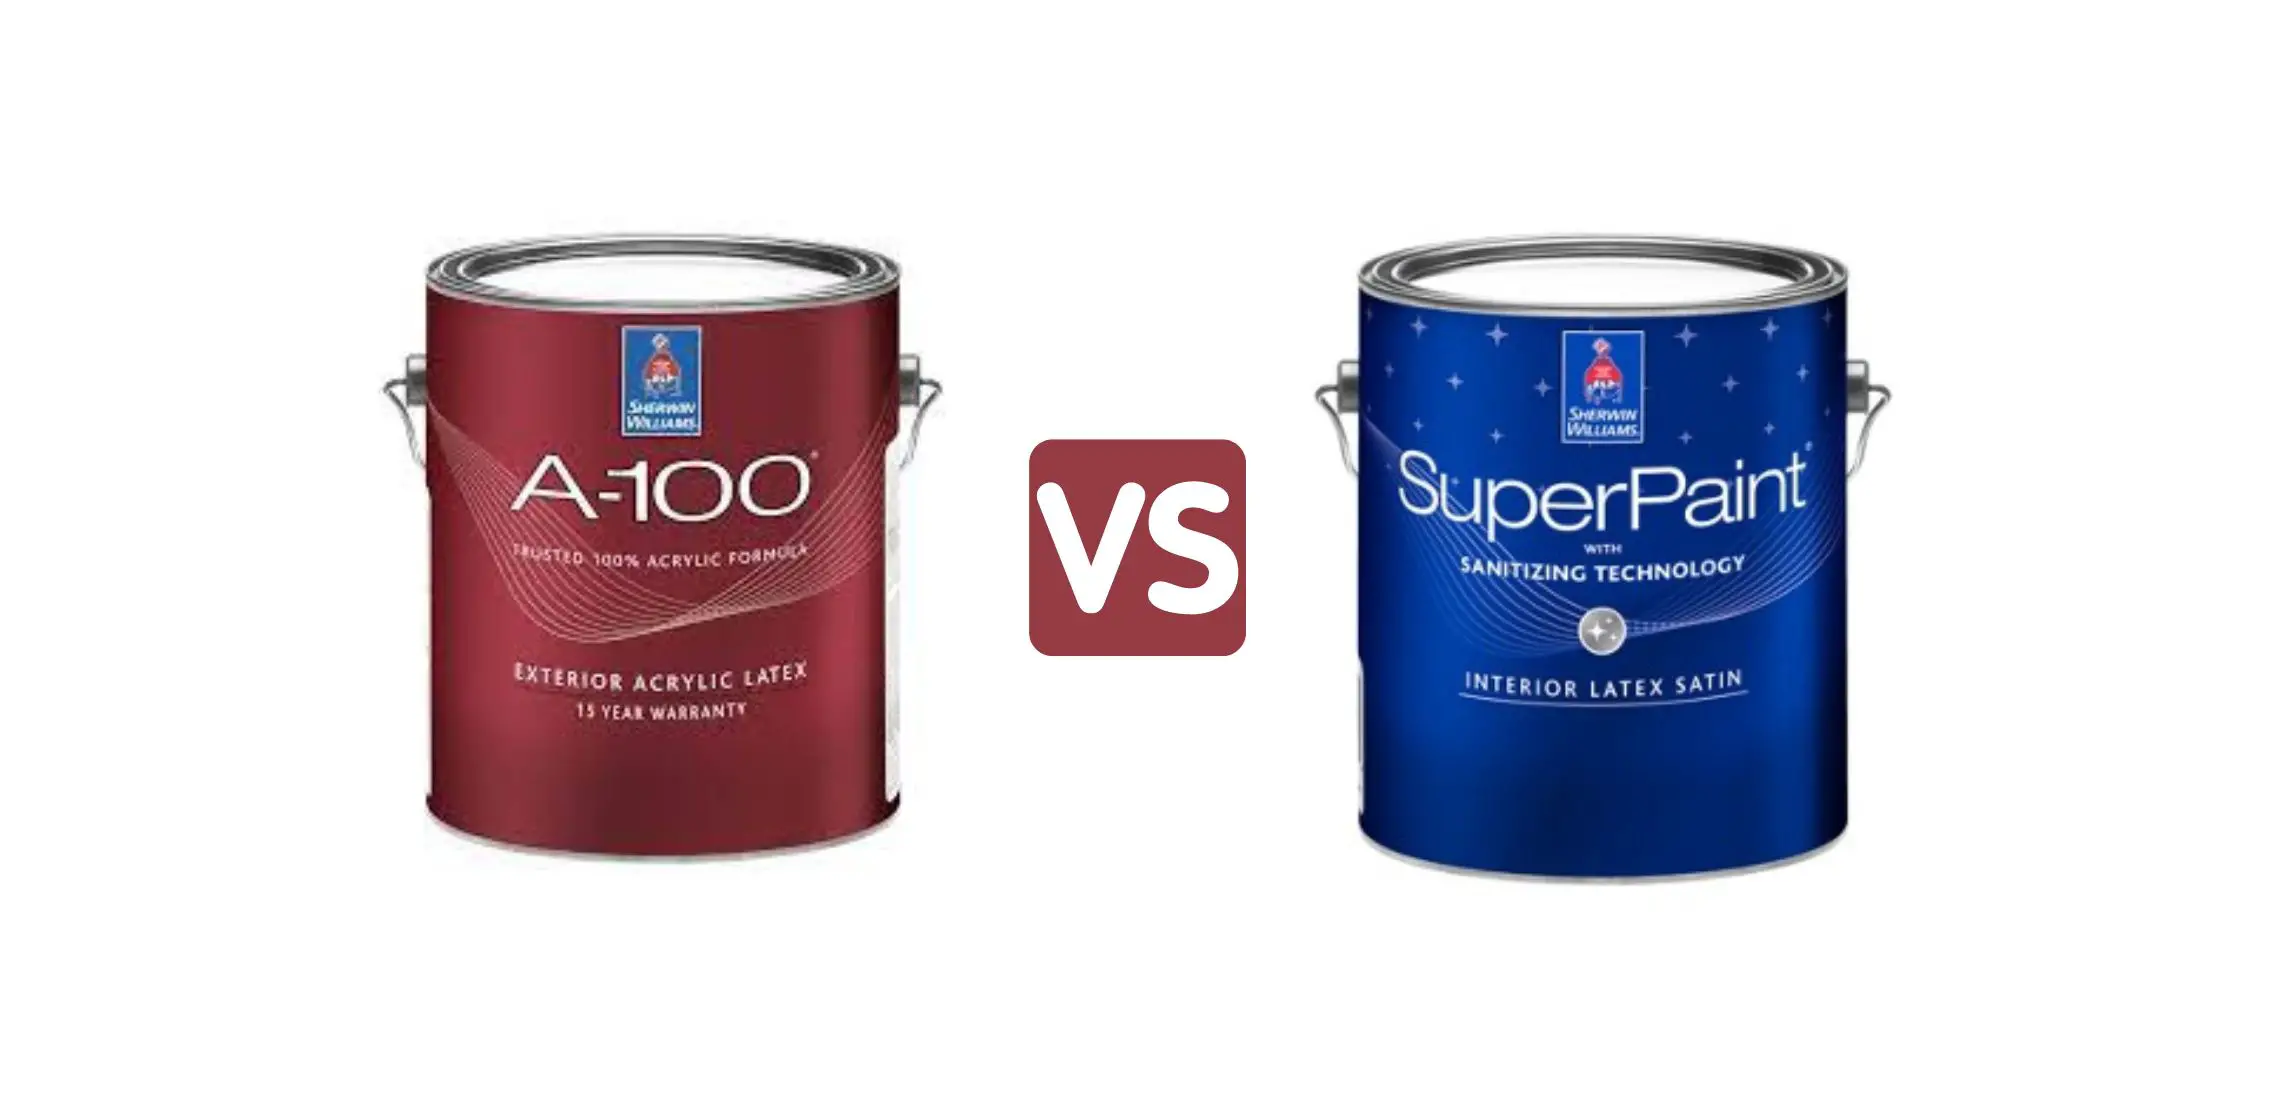 Sherwin Williams A100 Vs Superpaint